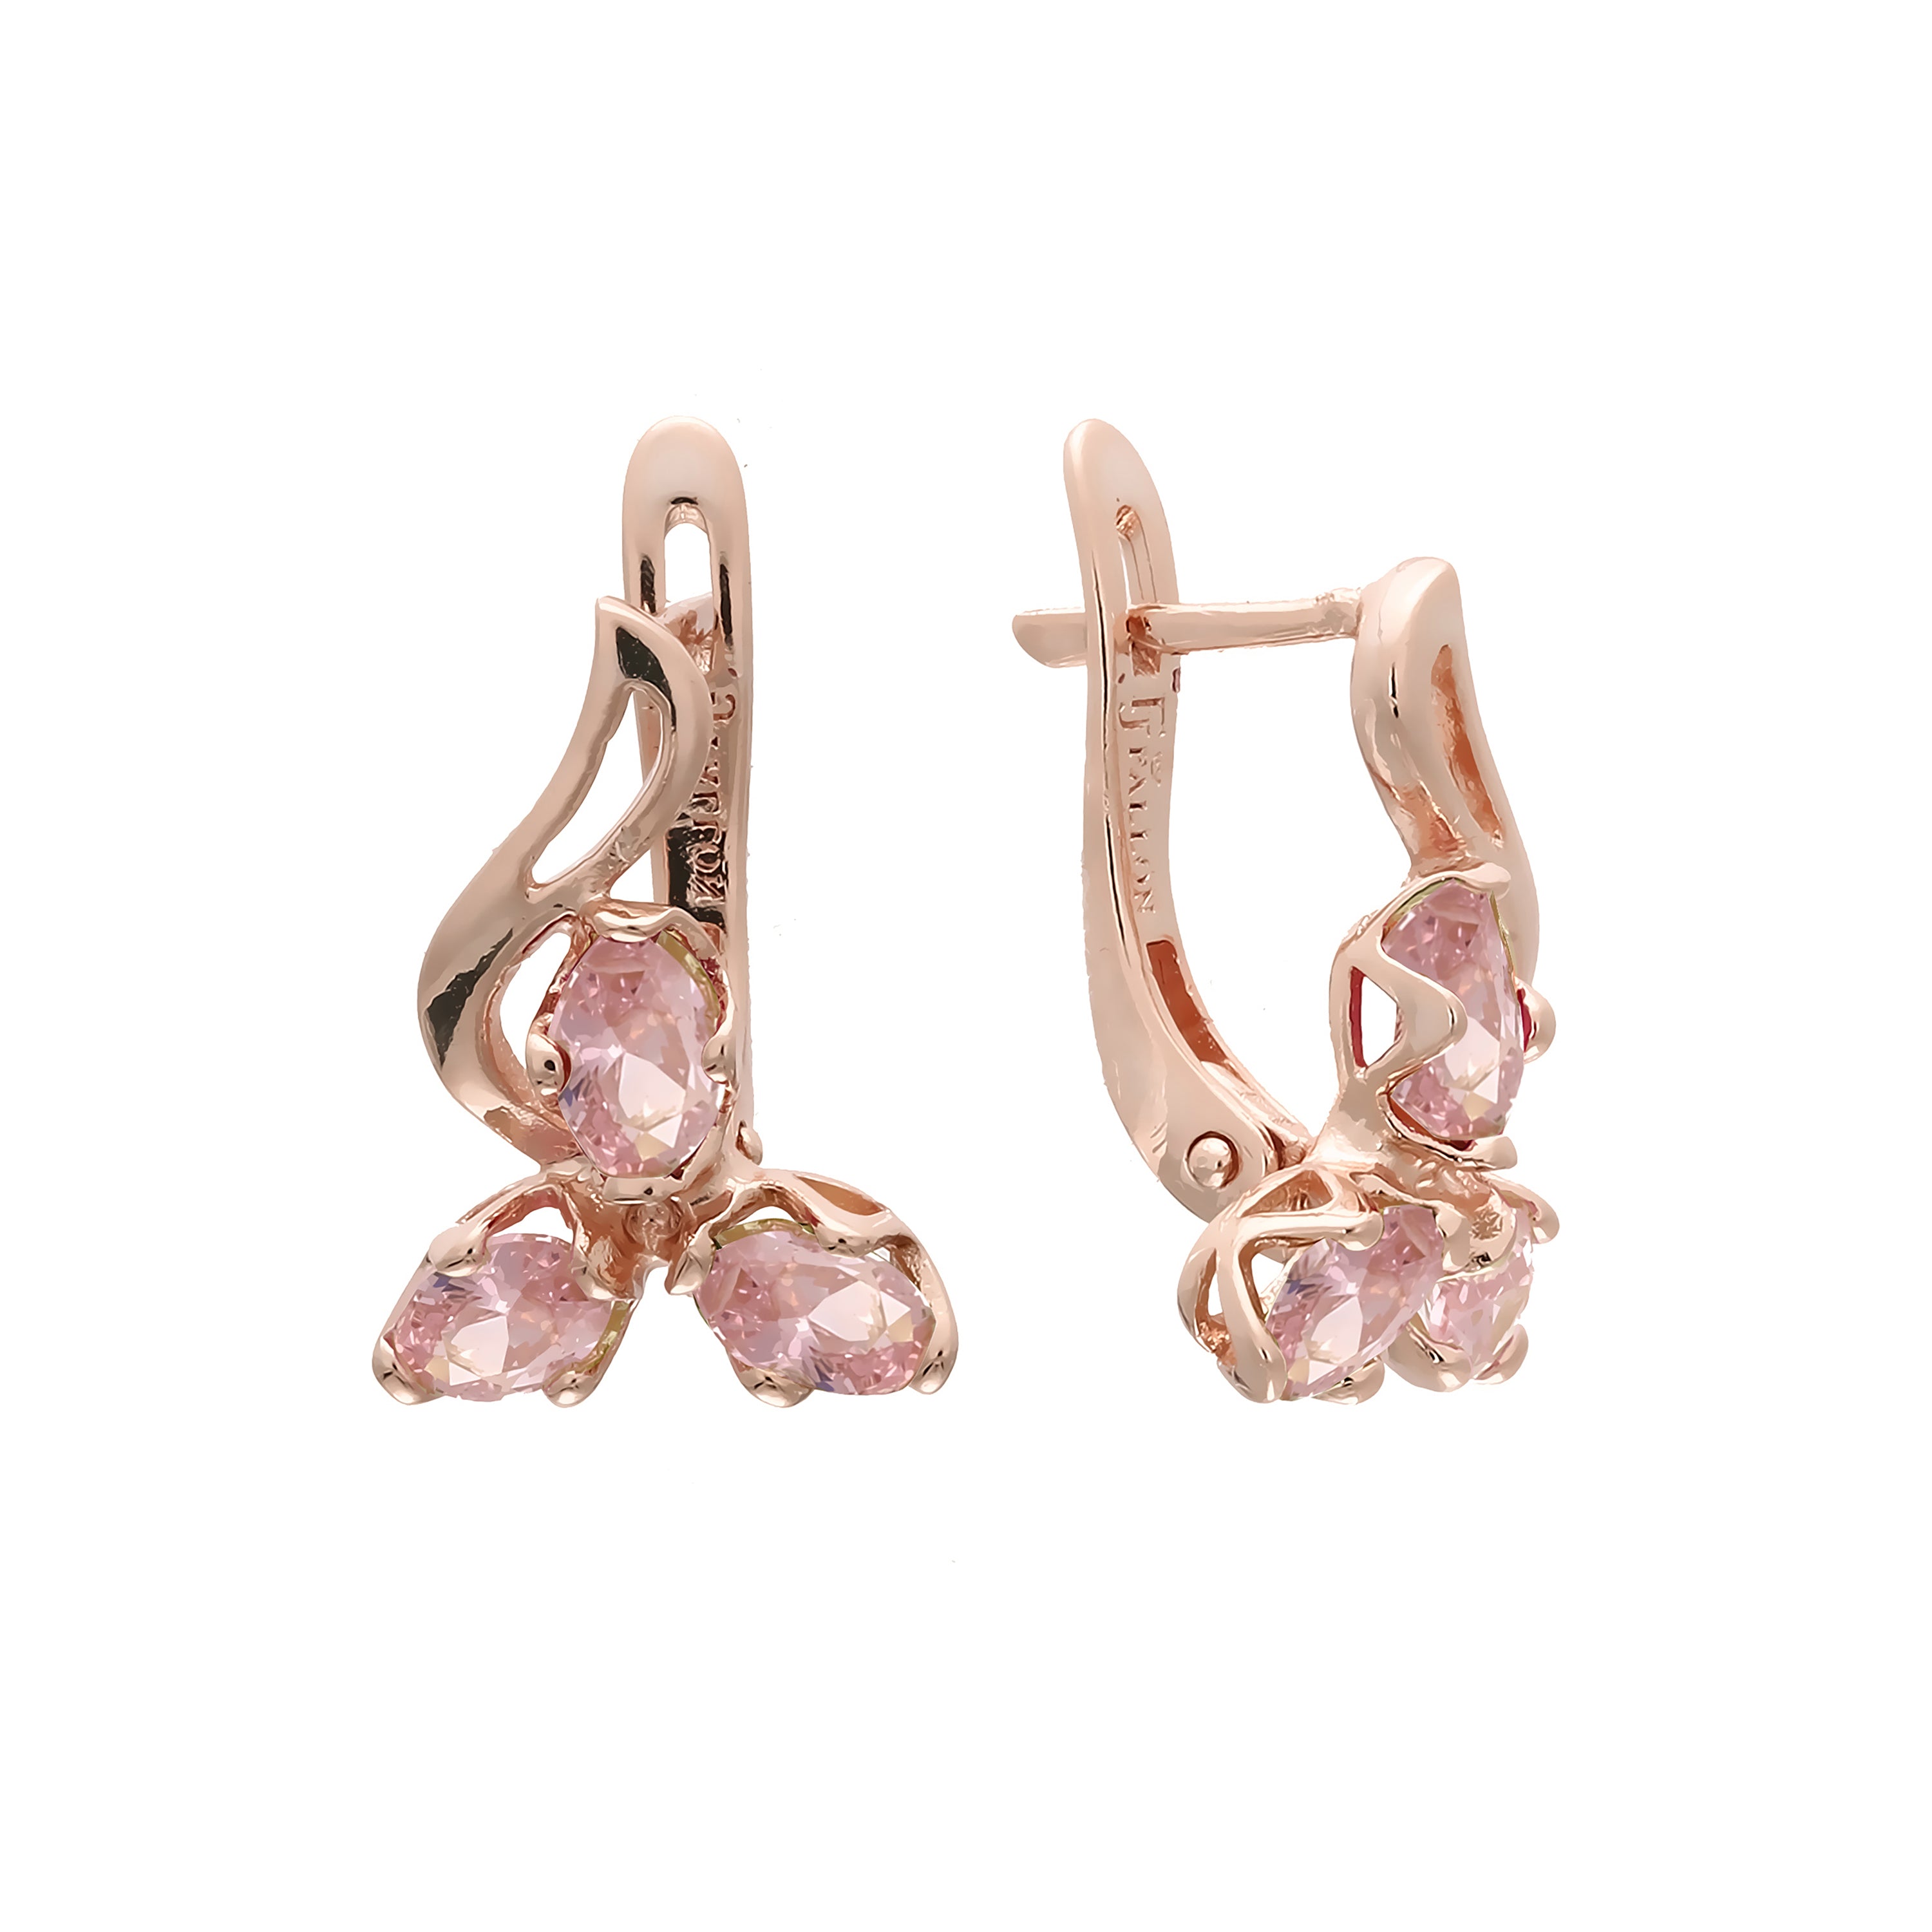 Cluster mixed colors earrings in 14K Gold, Rose Gold plating colors